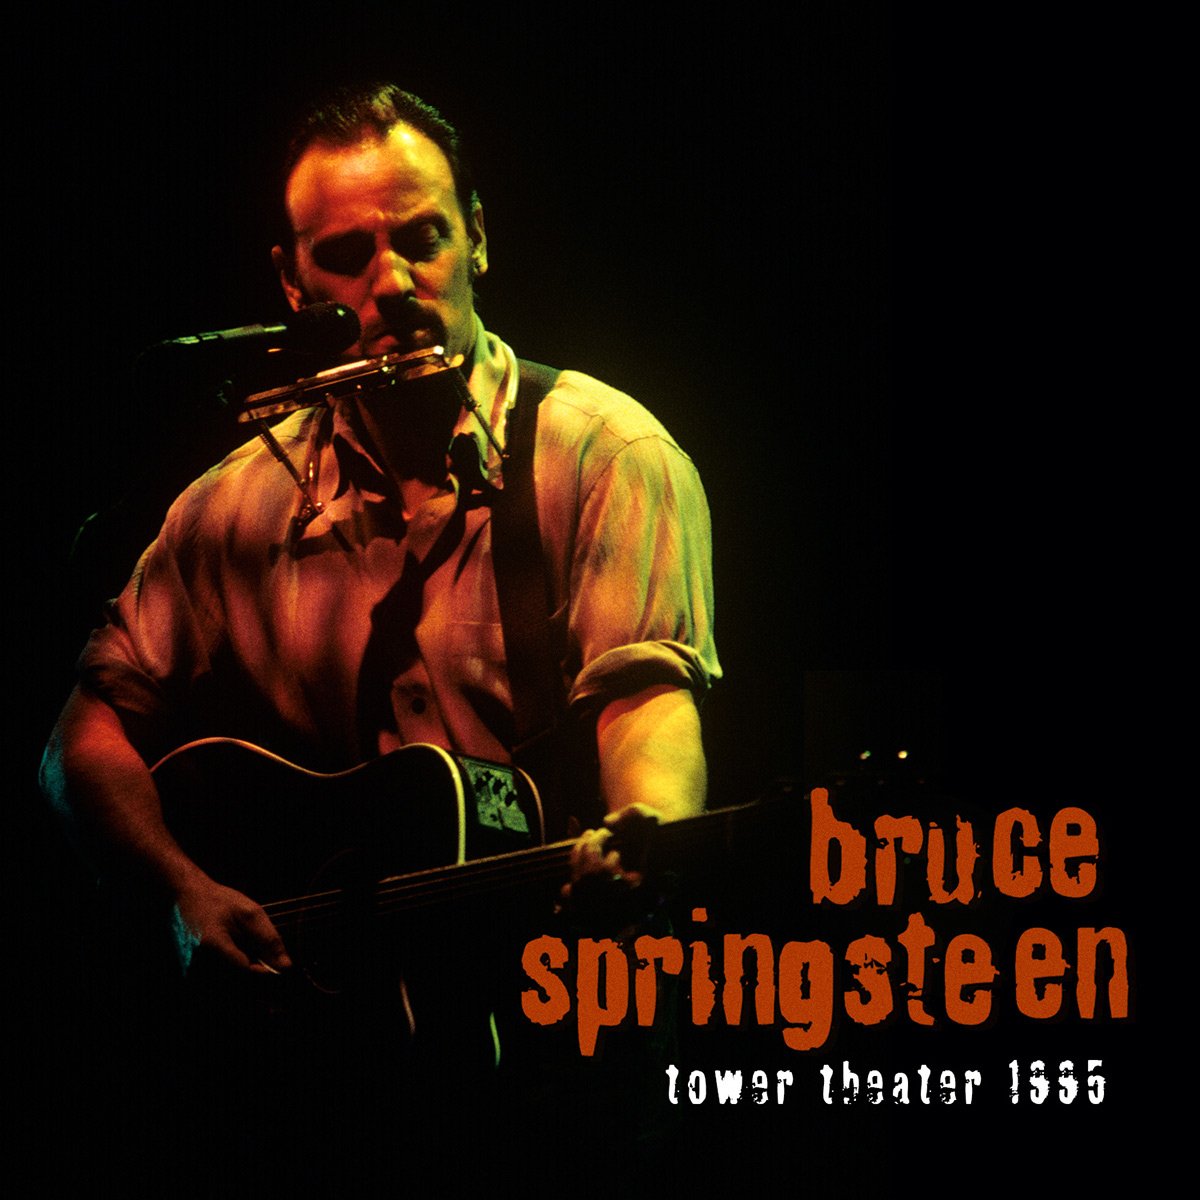 Bruce Springsteen - 12-09-95 - Tower Theater, Upper Darby, PA (2022) [FLAC 24bit/44,1kHz]